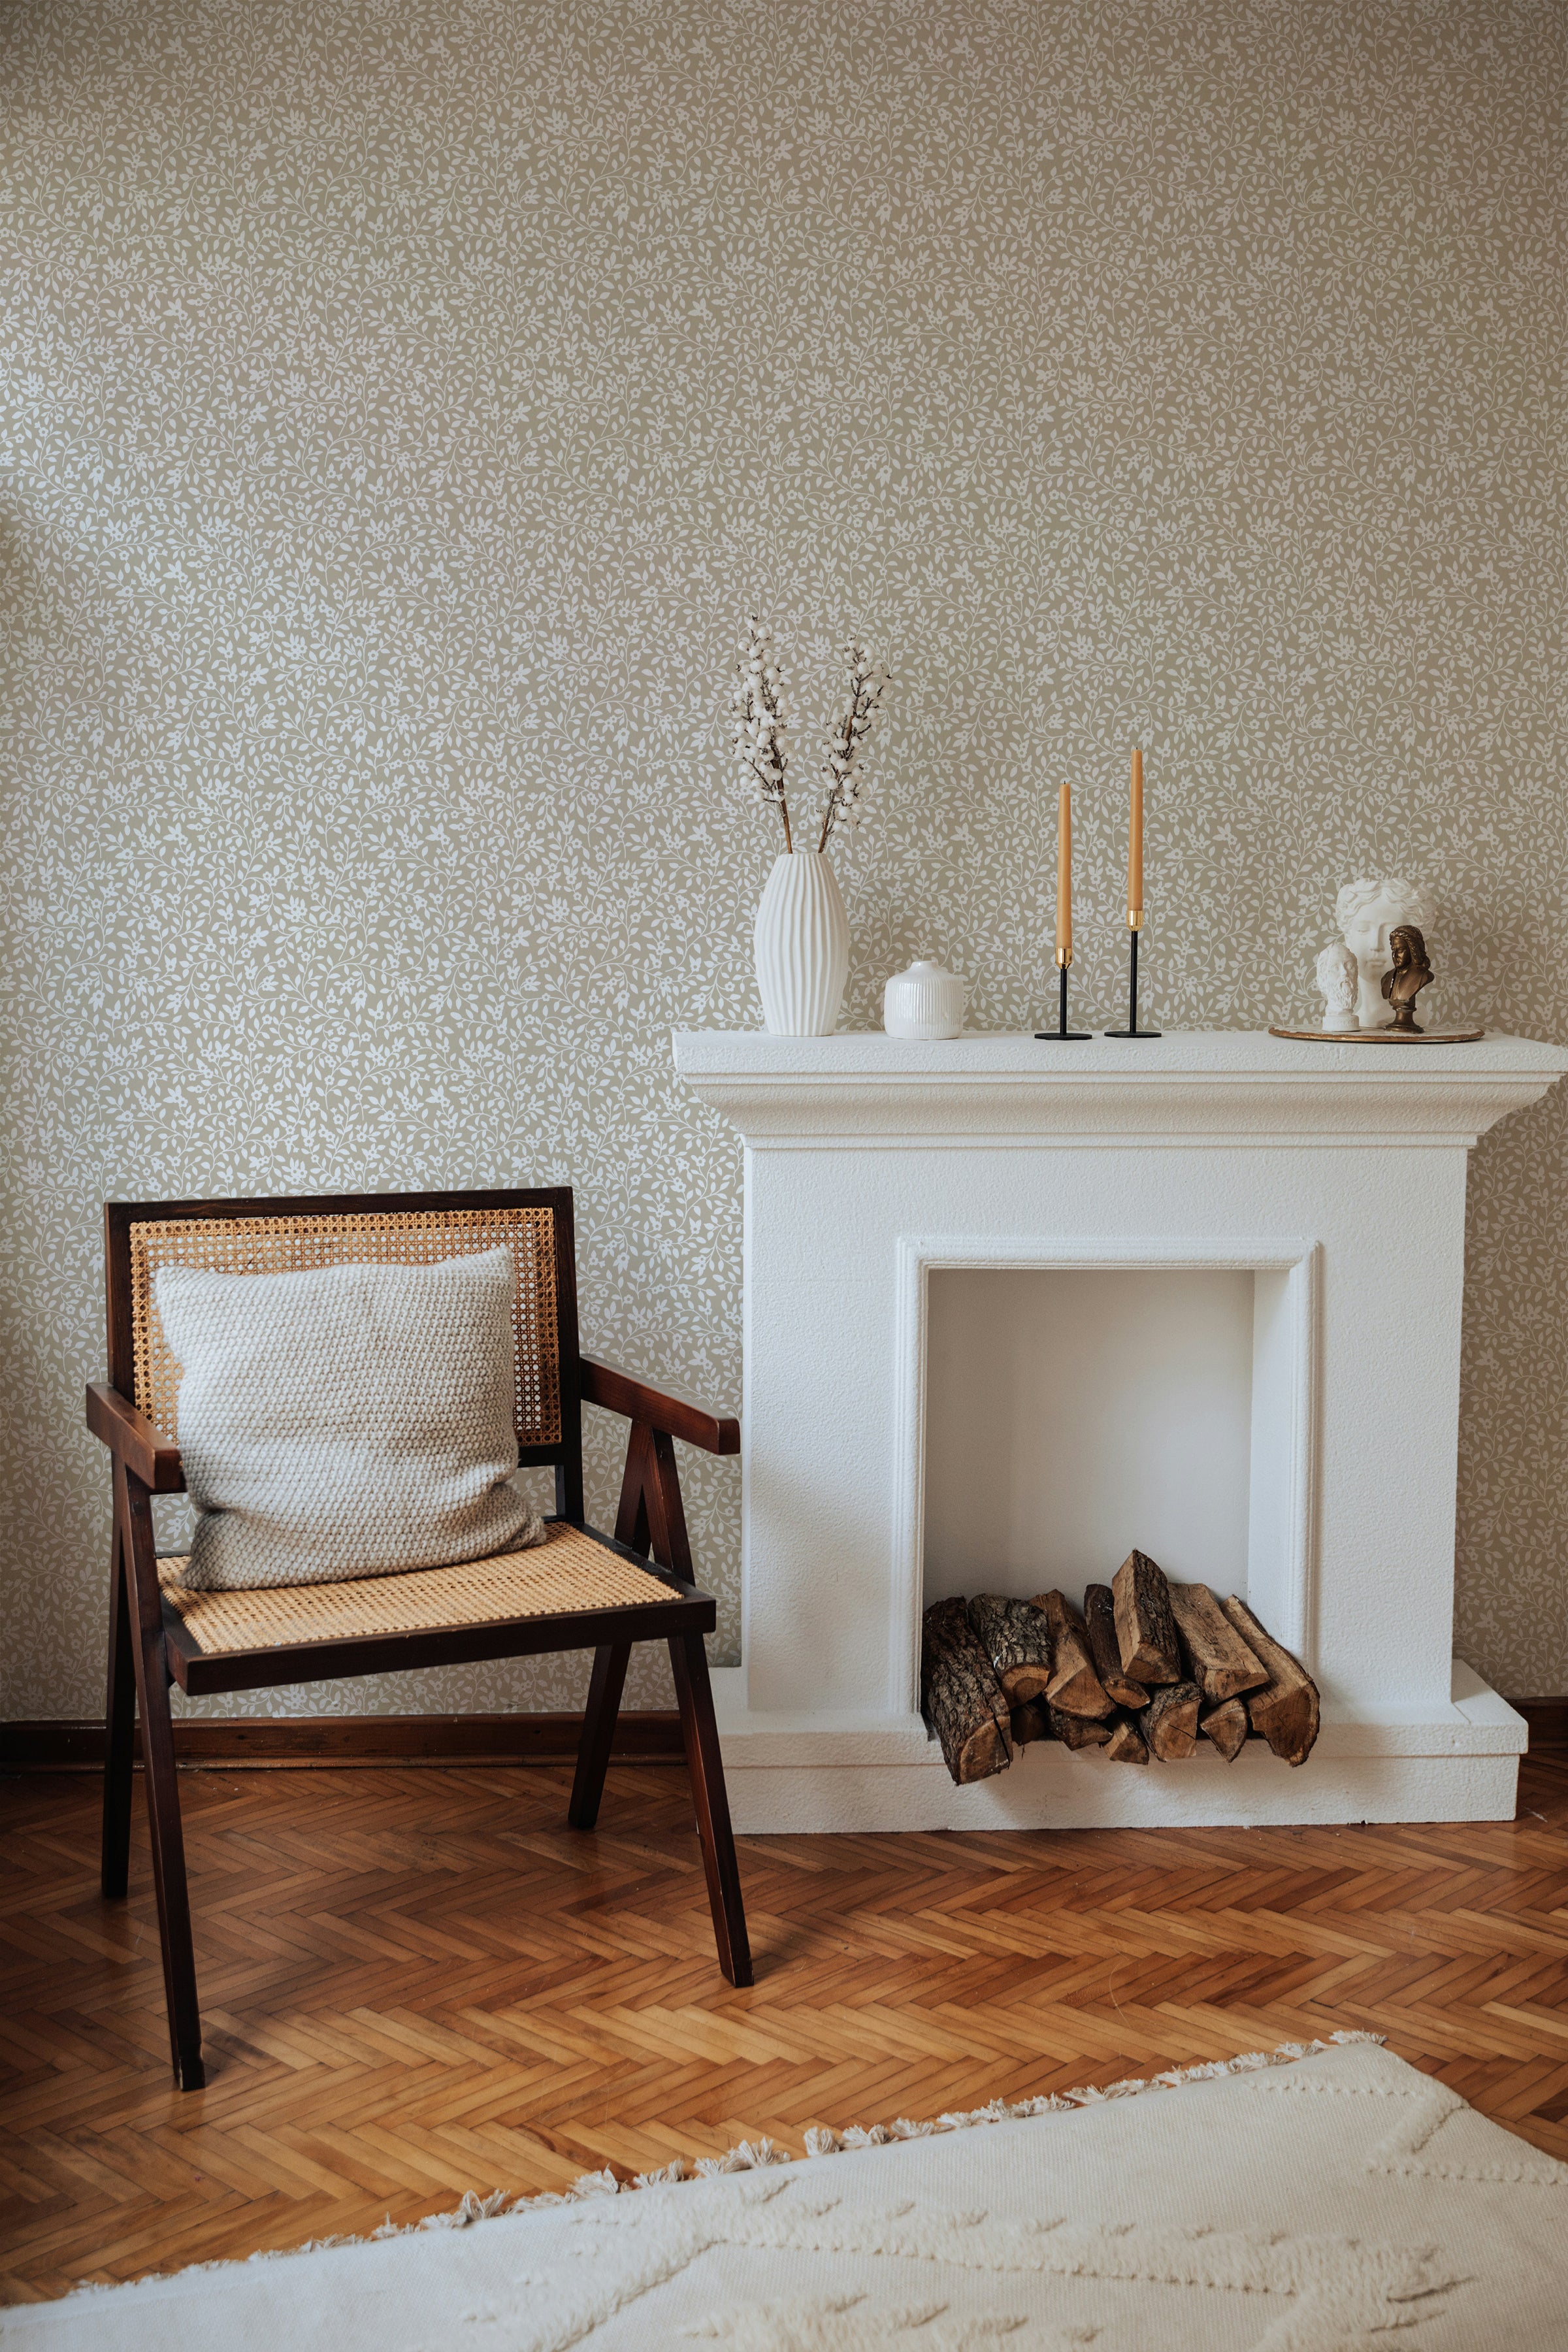 A warm and inviting room with herringbone wood flooring features a wall adorned with 'Floral Vines Wallpaper'. The wallpaper displays a dense pattern of taupe floral vines, providing a vintage charm. The decor includes a classic white fireplace with logs, a mid-century modern chair with a rattan back, and decorative objects atop the mantel.